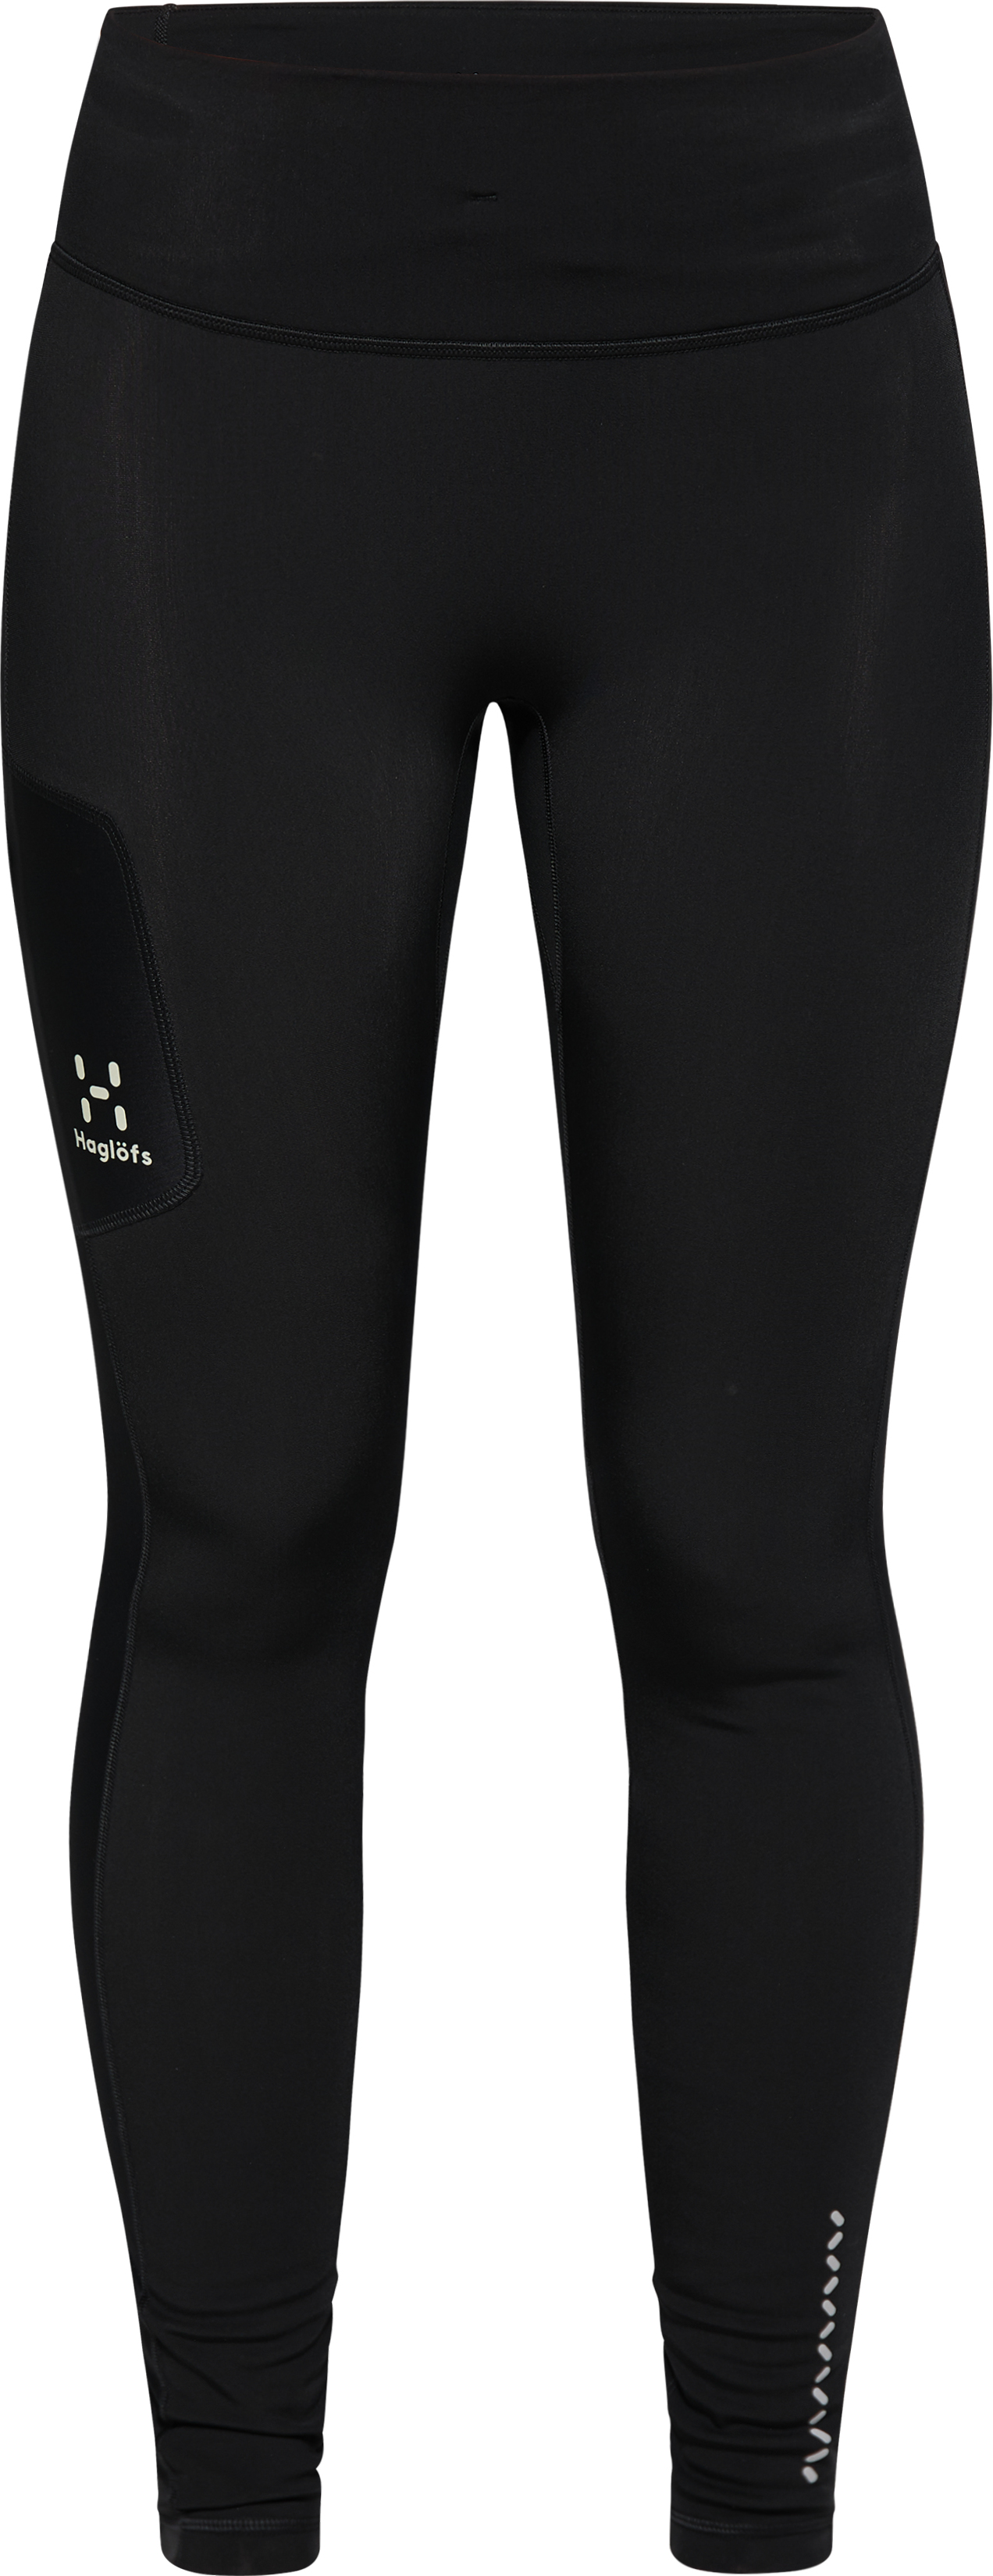 L.I.M Winter Tights Women, Tarn blue/Frost blue, Hiking trousers, Trousers, Shorts, Baselayers, Tights, Collection, Bottoms, Activities, Activities, Baselayers, Tights, L.I.M, Hiking, Women, Hiking